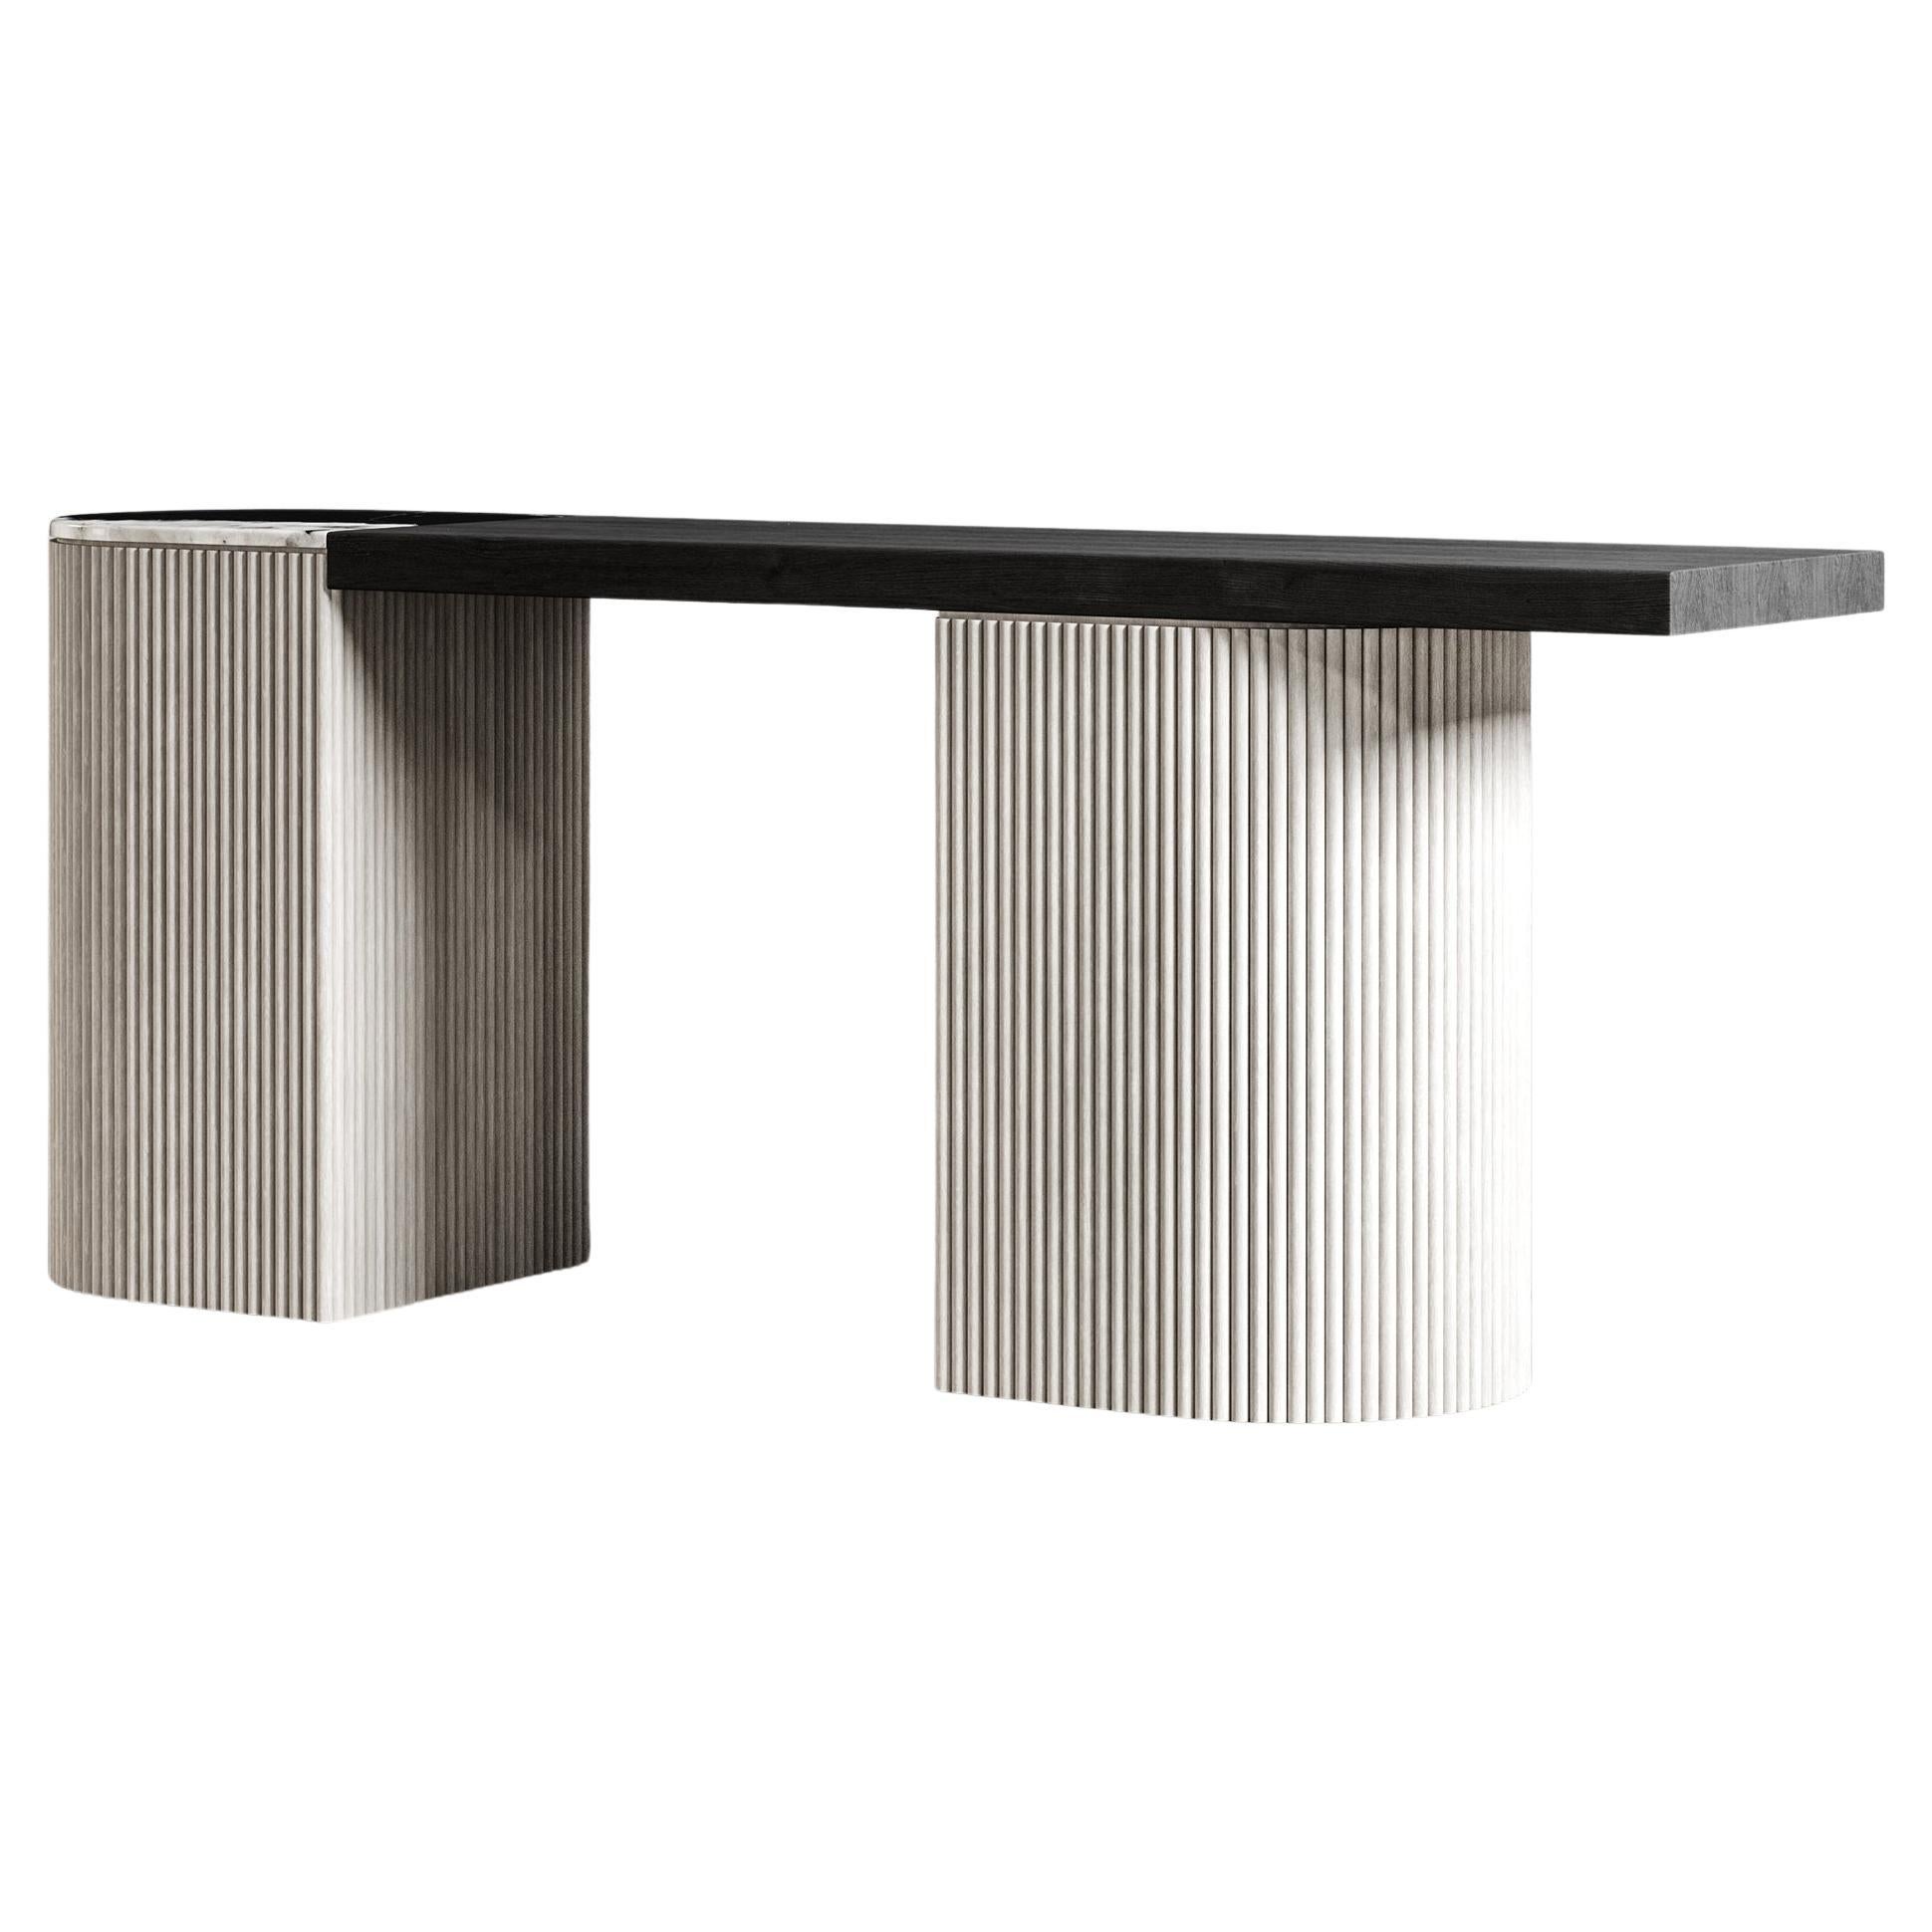 SWAY CONSOLE - Modern Design with Sandy & Ebony Oak, Nero Marquina Marble For Sale